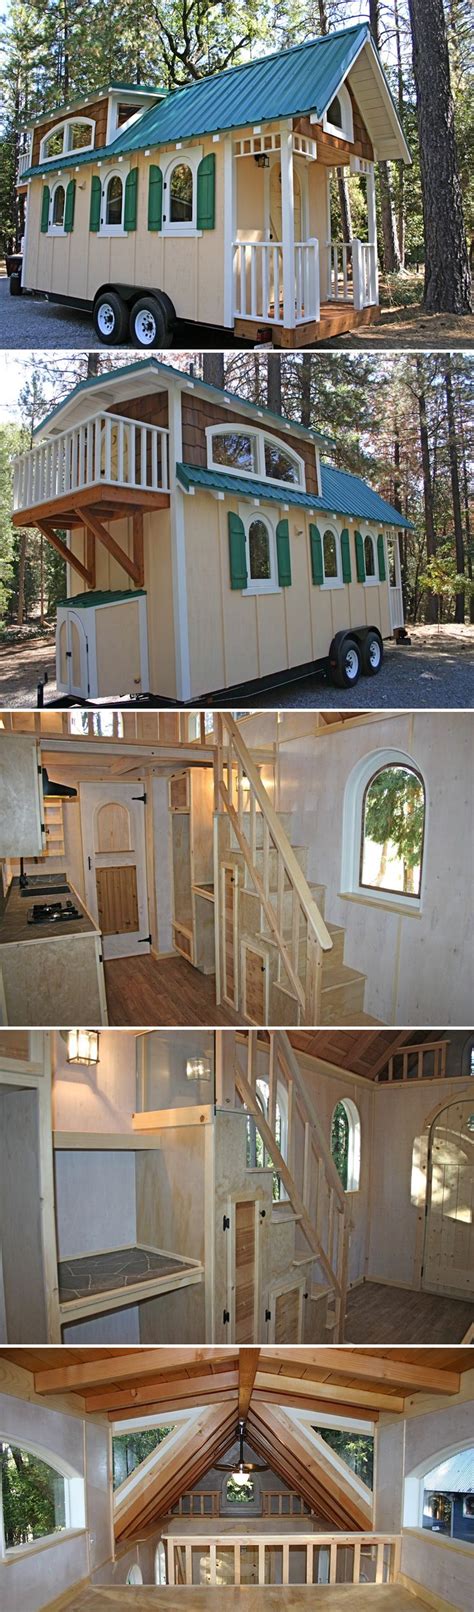 Tiny House Living This 20 Tiny House Comes With Handcrafted Arched